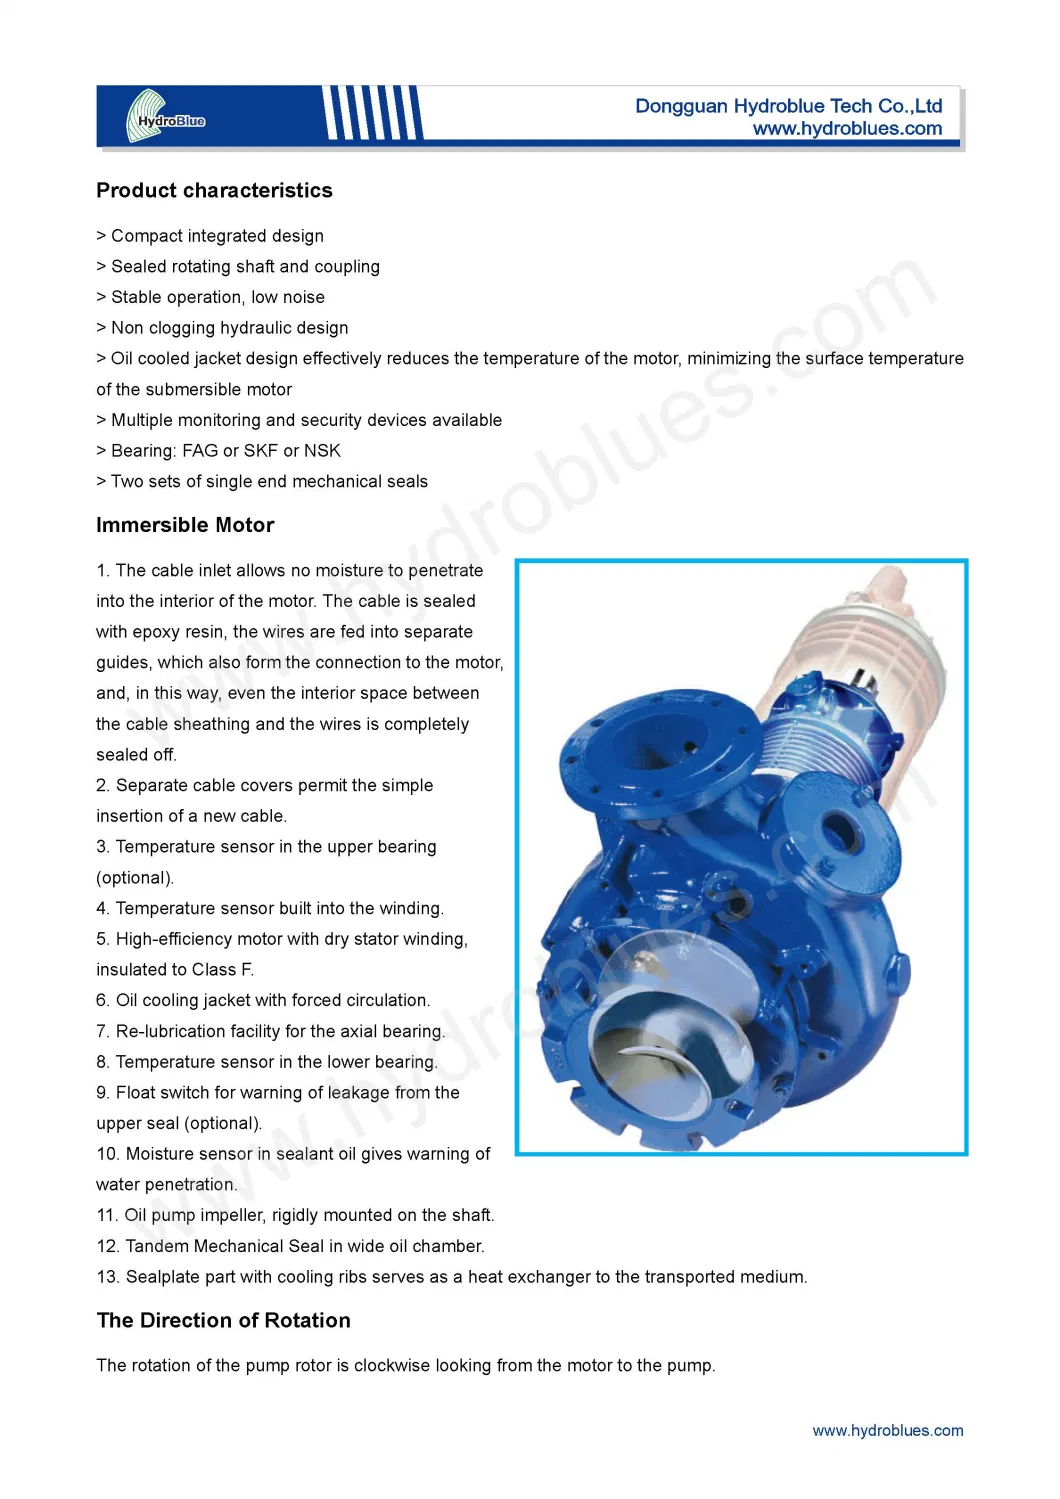 Centrifugal Pump Applications Oil Screw Submersible Spiral Pump